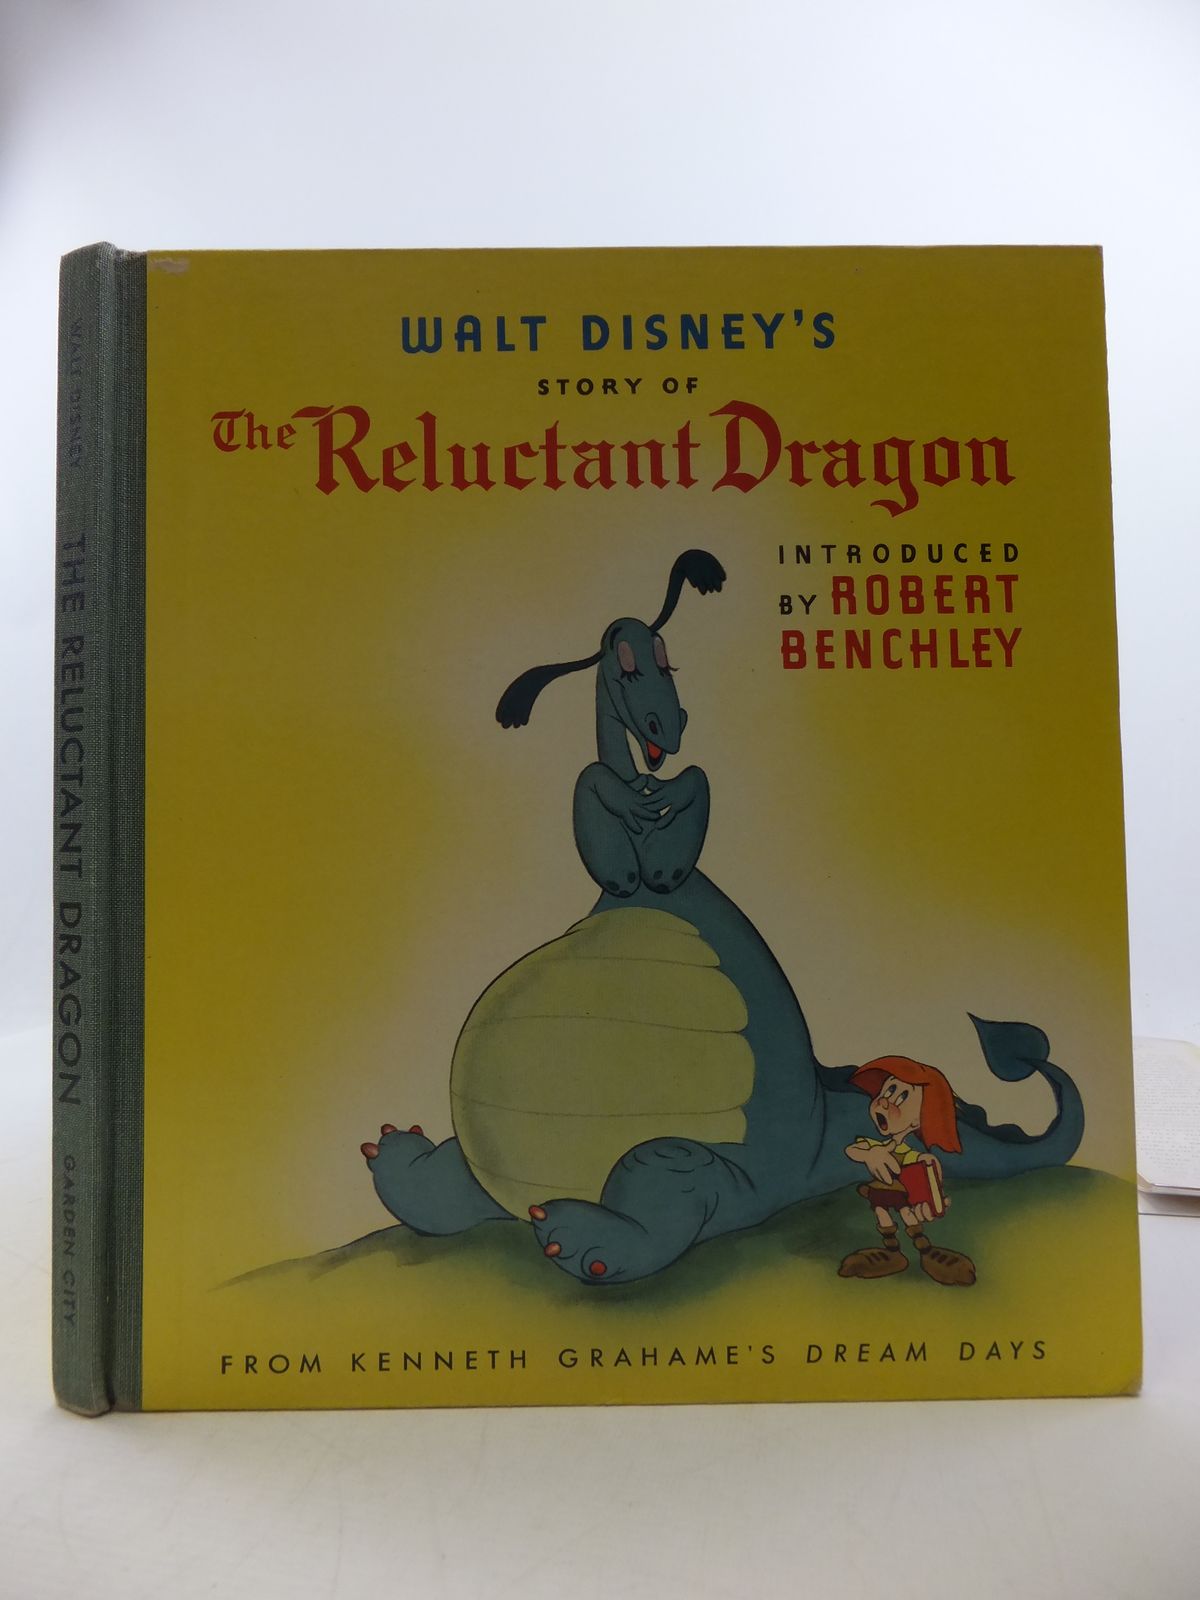 Photo of THE RELUCTANT DRAGON written by Disney, Walt
Benchley, Robert
Grahame, Kenneth published by Garden City Publishing Co. (STOCK CODE: 1207806)  for sale by Stella & Rose's Books